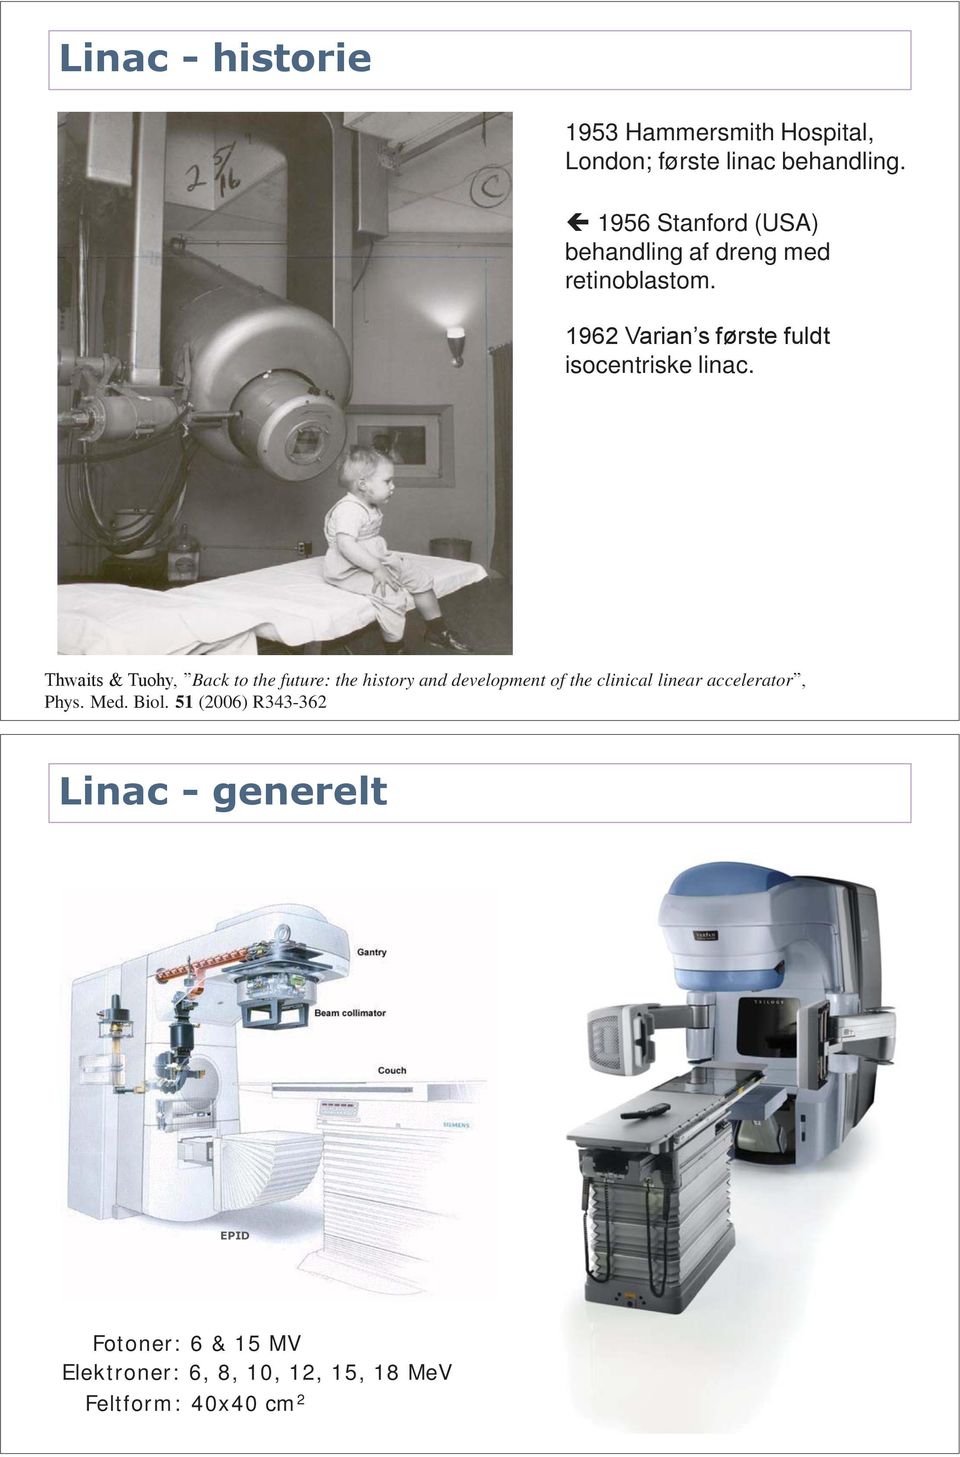 Thwaits & Tuohy, Back to the future: the history and development of the clinical linear accelerator,